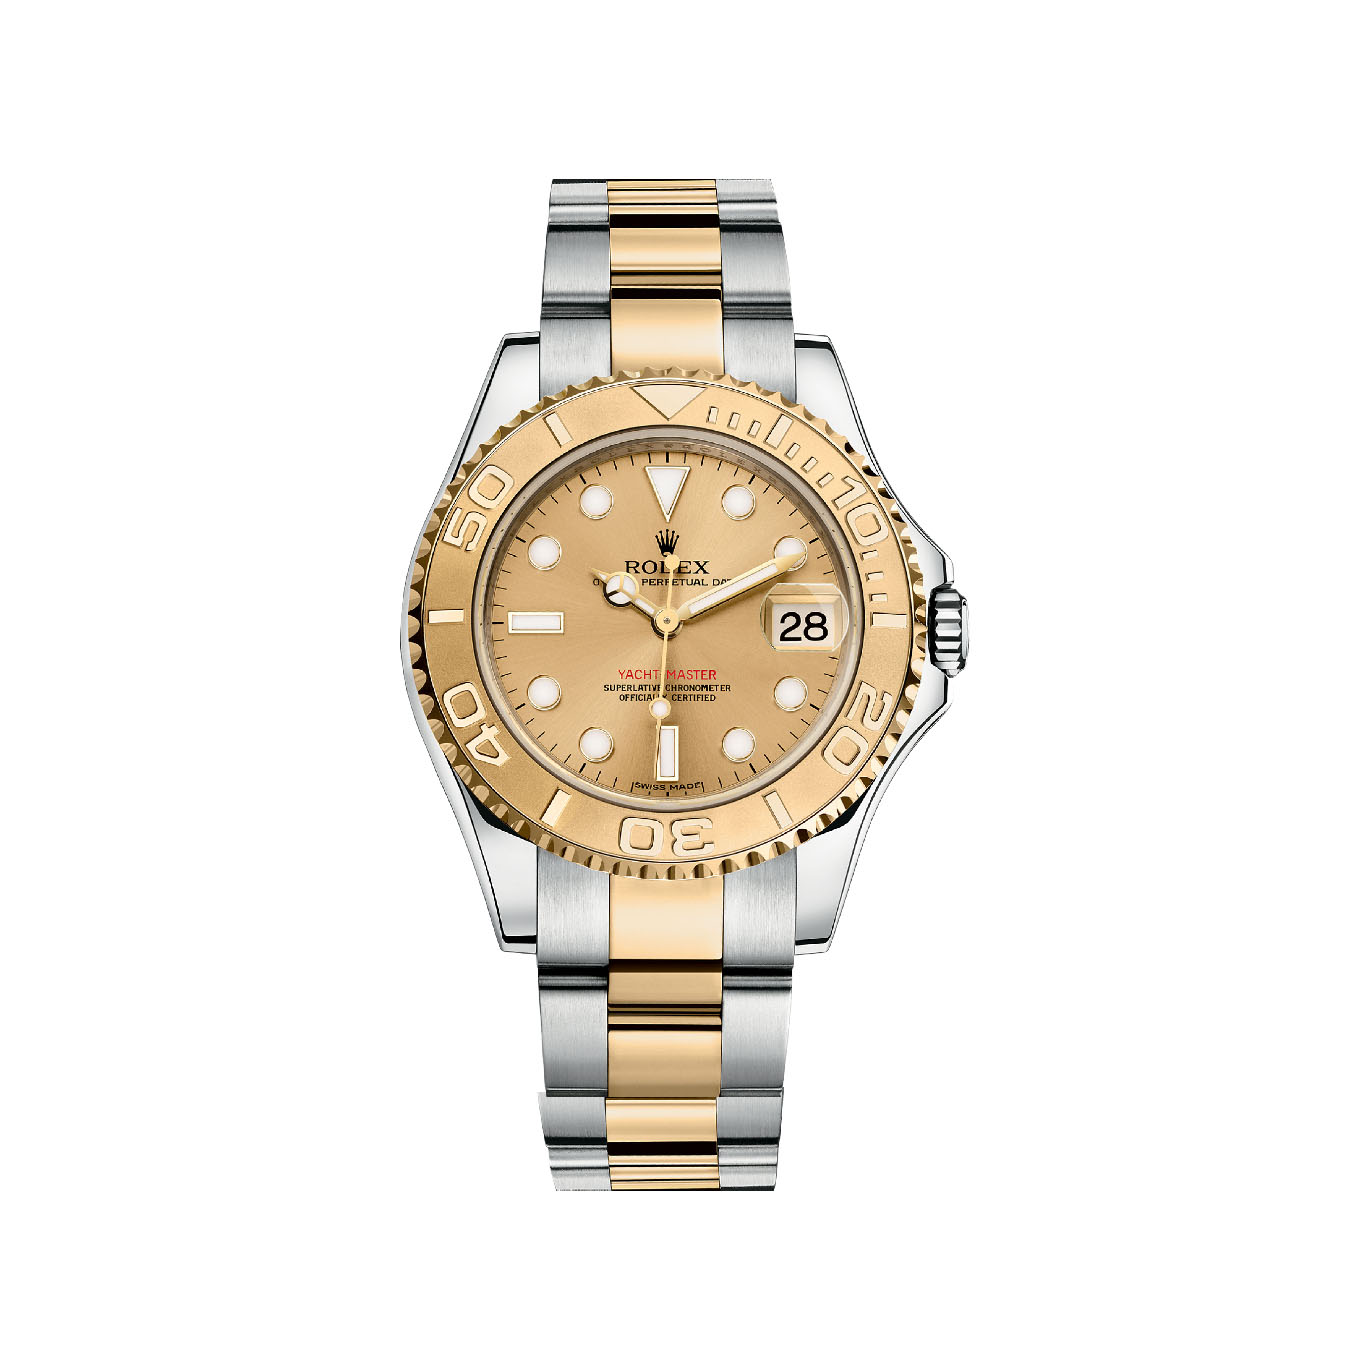 Yacht-Master 35 168623 Gold & Stainless Steel Watch (Champagne)